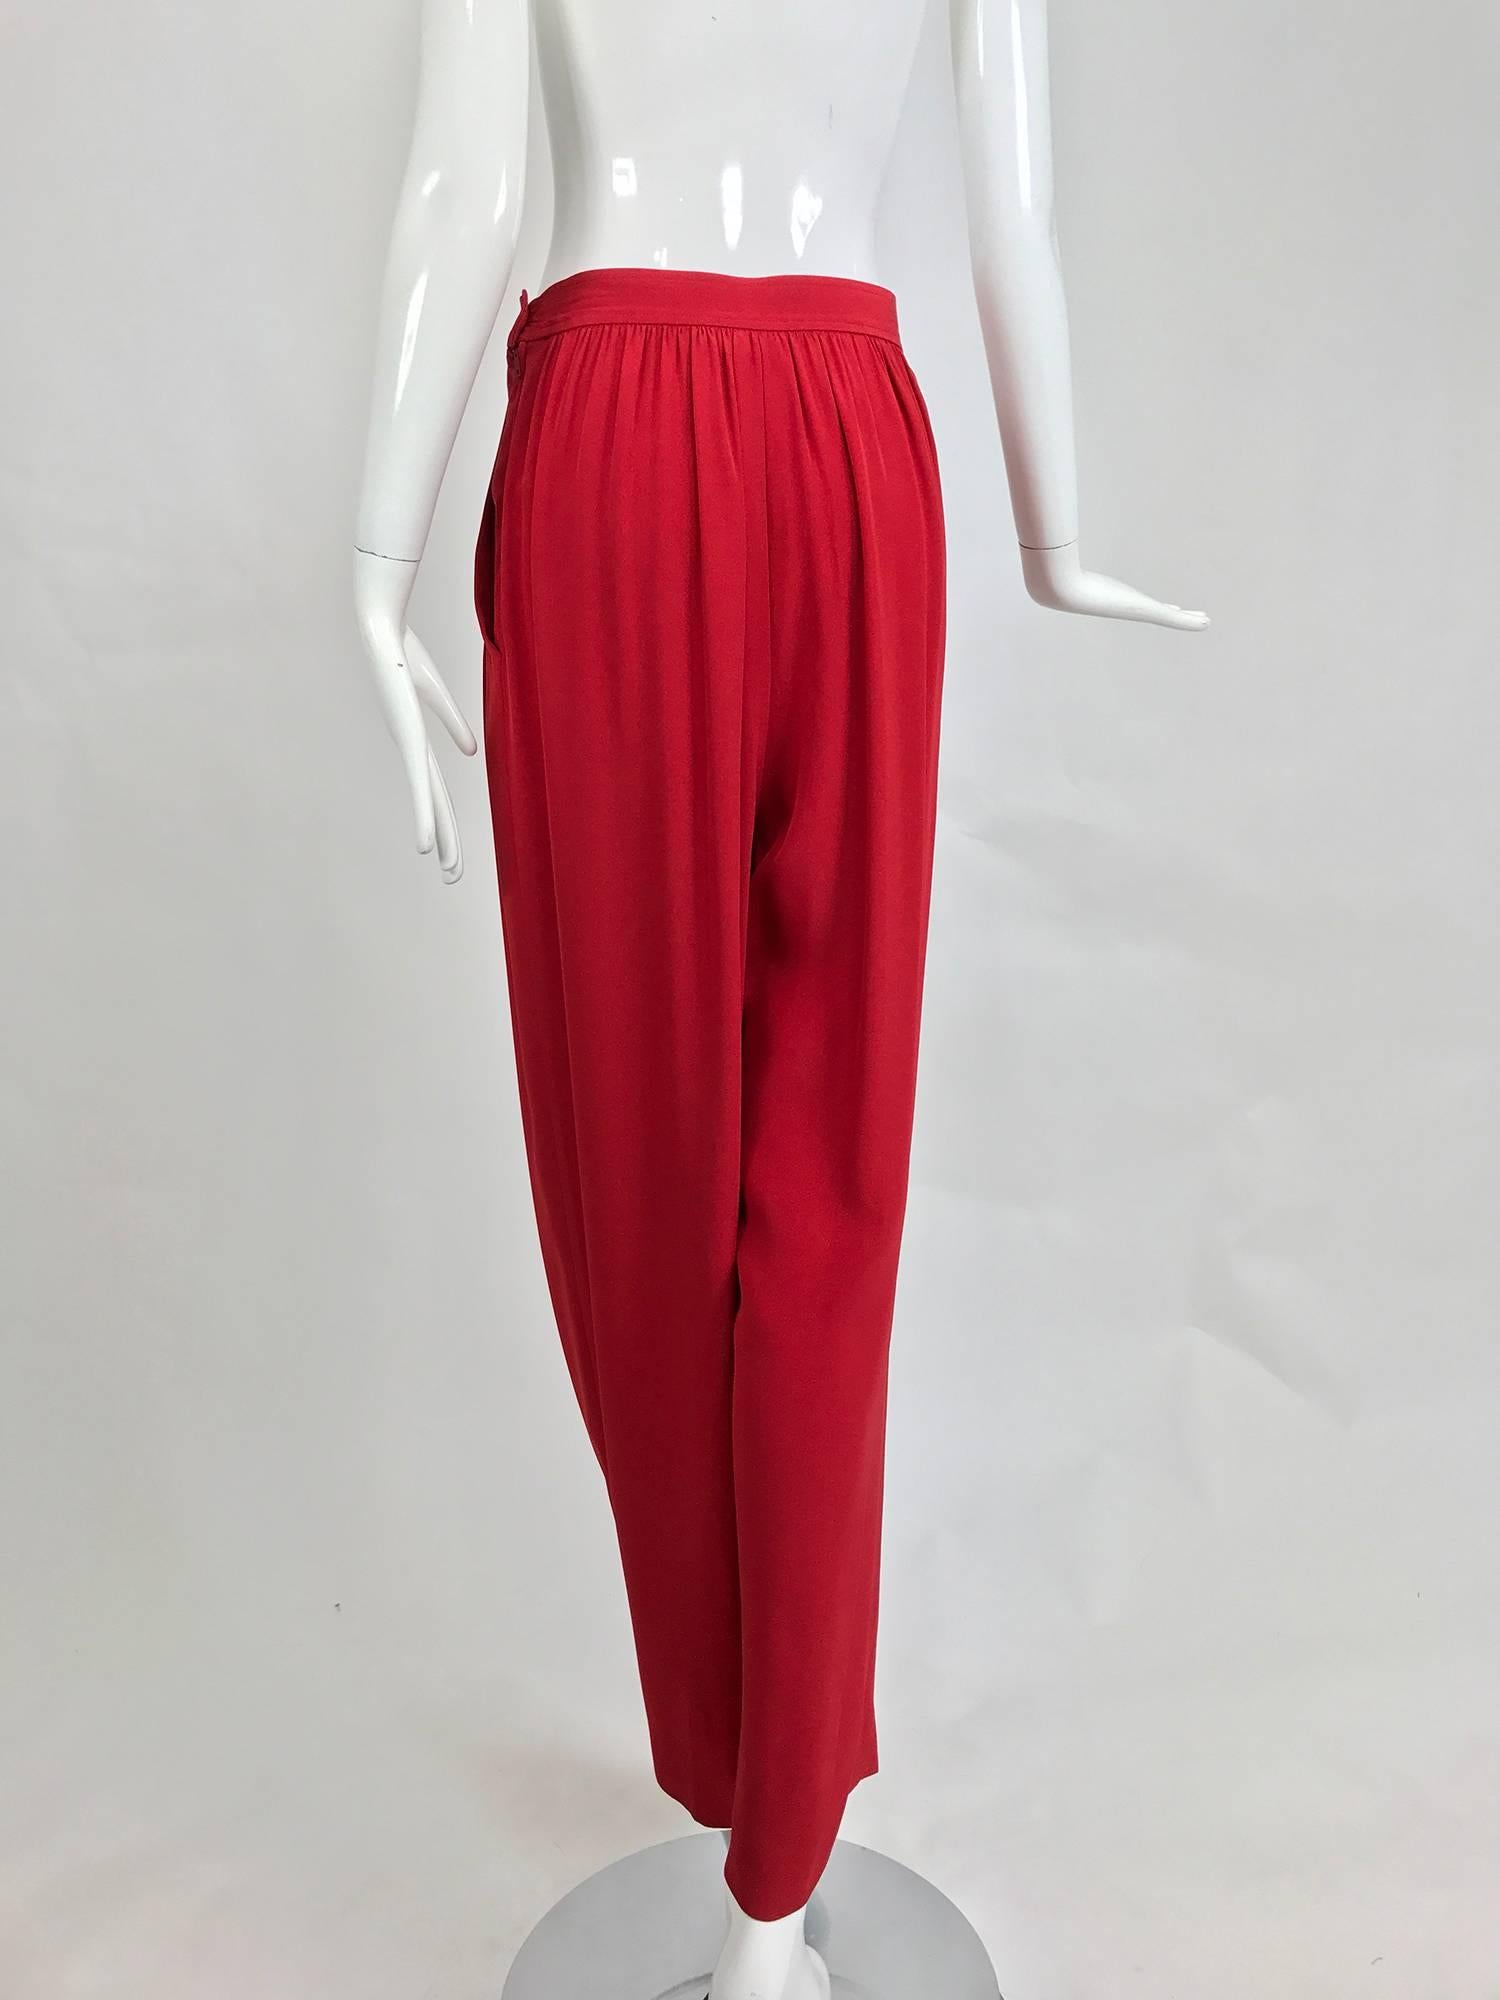 Vintage Yves Saint Laurent candy apple red satin back crepe full leg trousers from the 1990s...These amazing trousers have a banded button zwaist and close at the side with a zipper, curved hip side pockets...The front features open pleats...Full